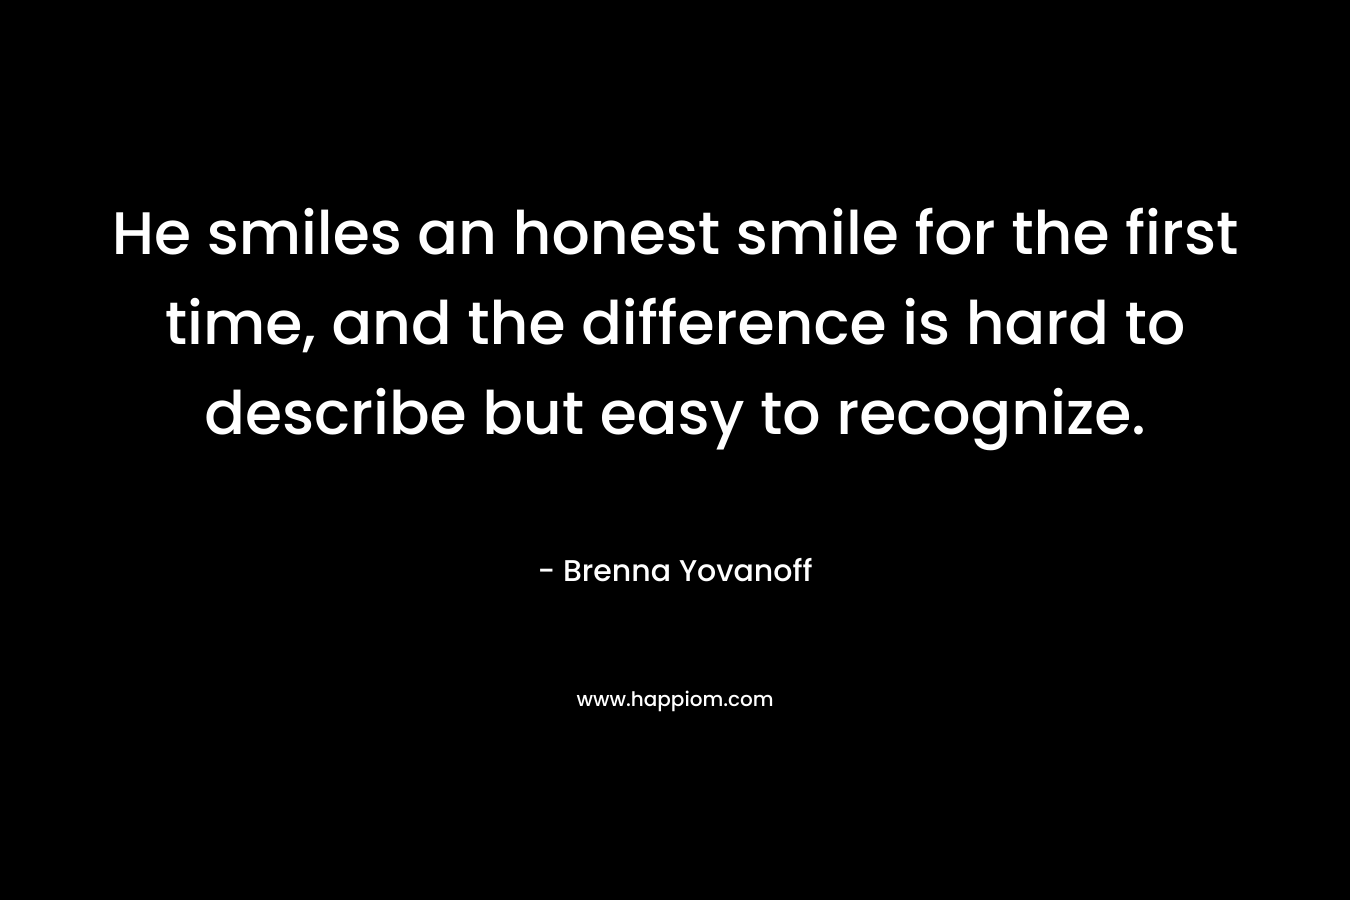 He smiles an honest smile for the first time, and the difference is hard to describe but easy to recognize. – Brenna Yovanoff